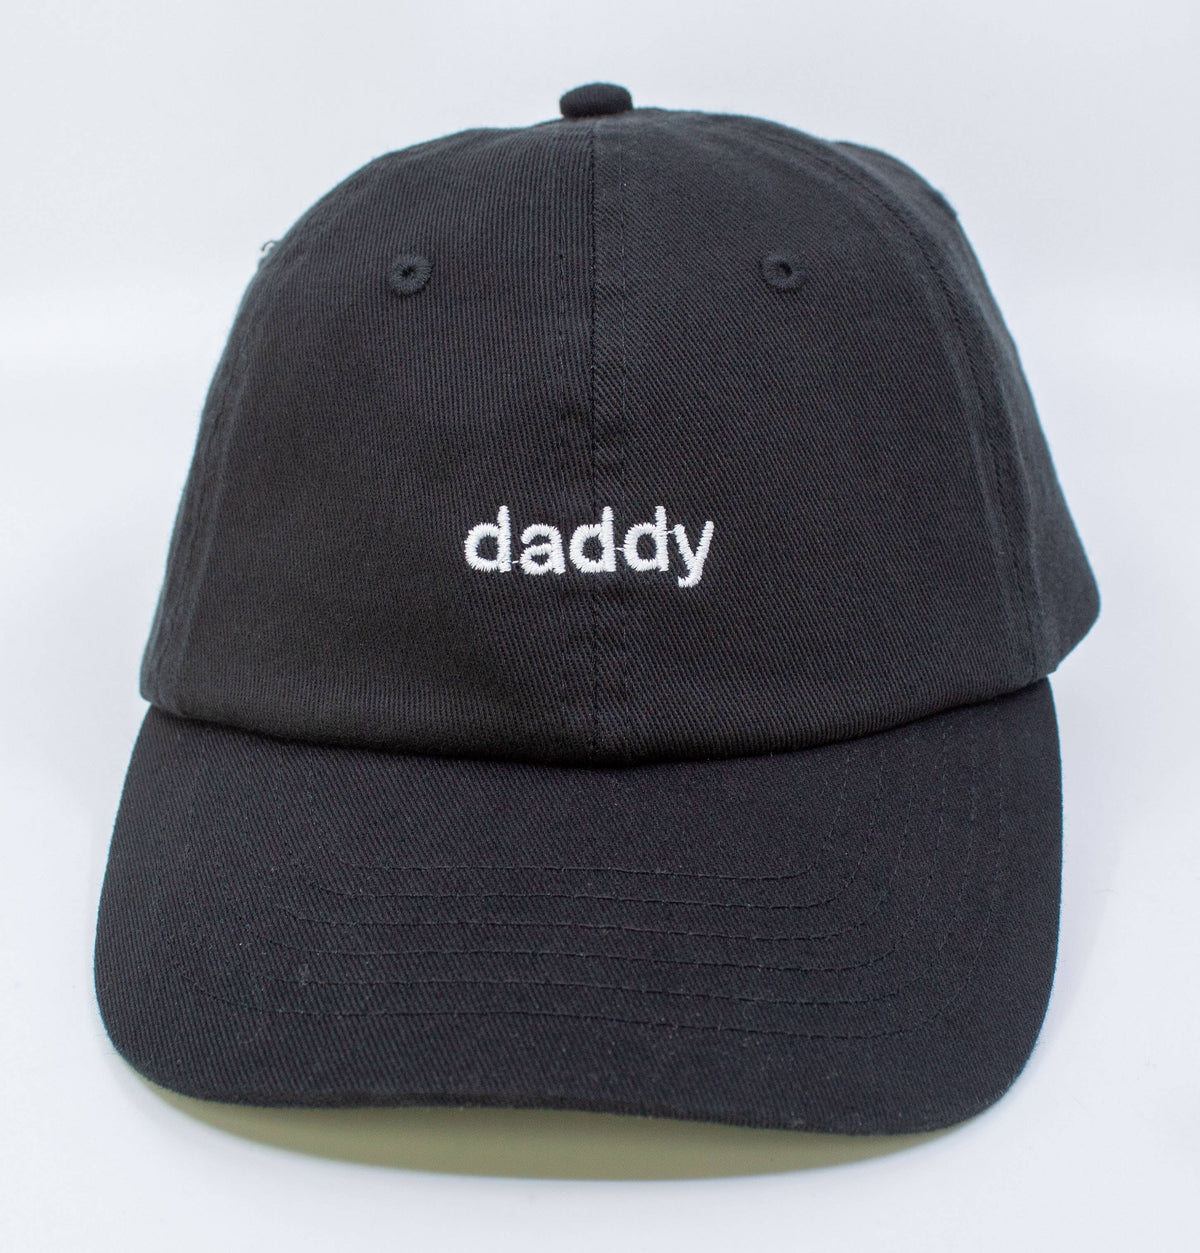 Daddy Embroidered Hat